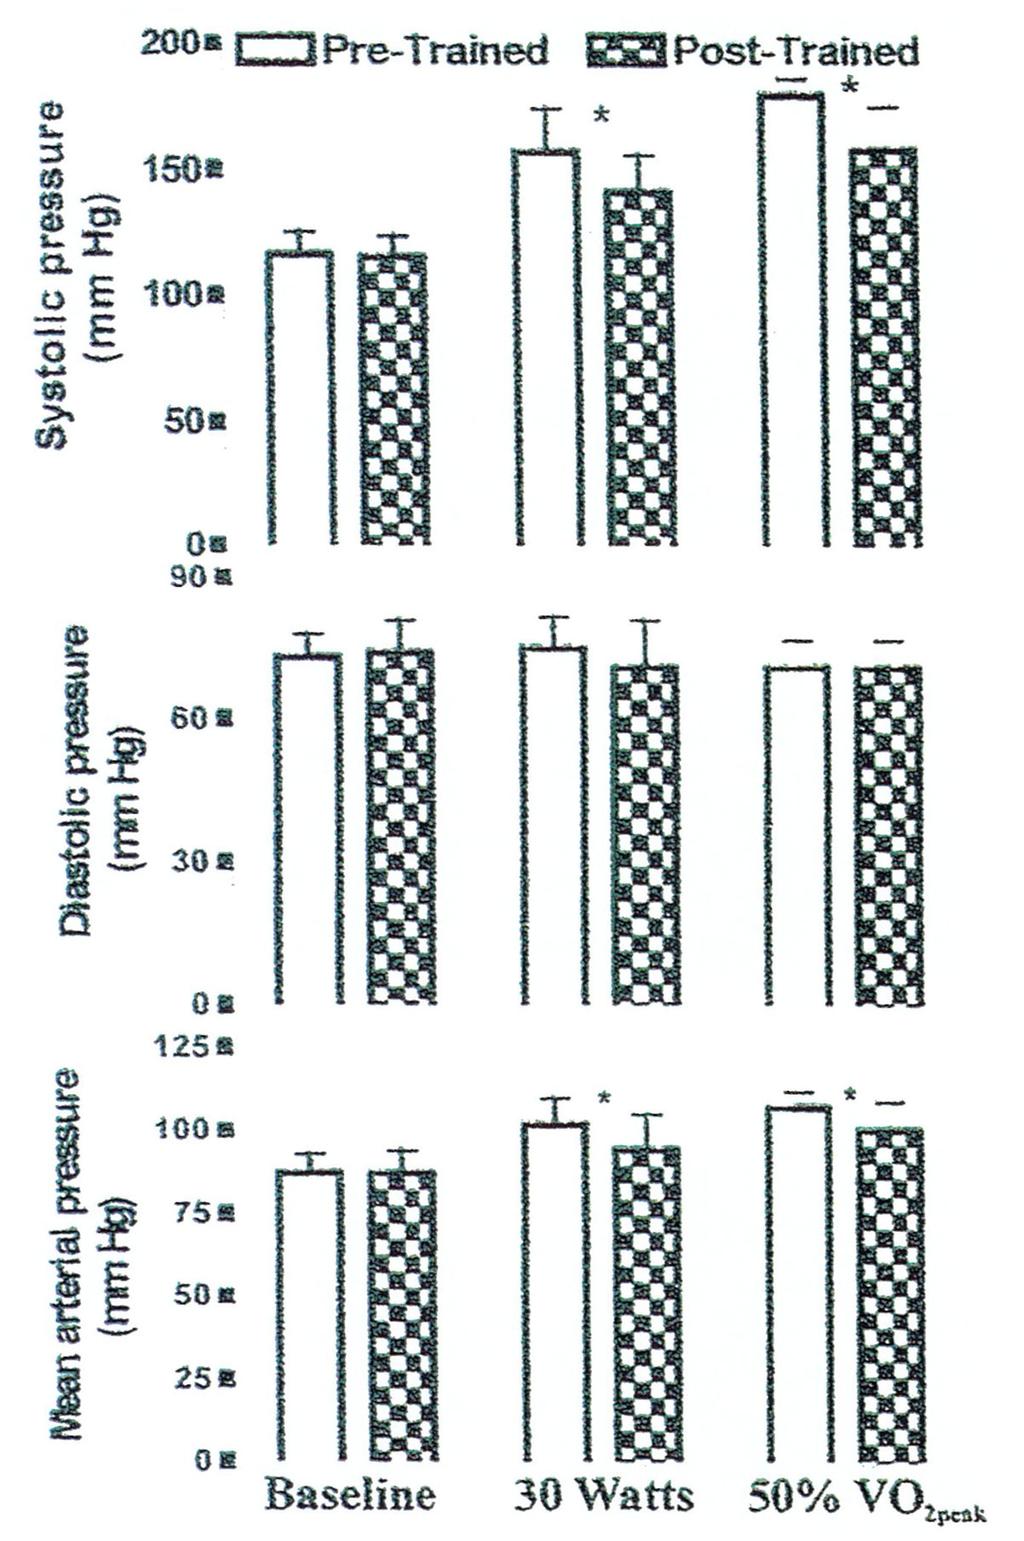 Bond et al. Page 7 Fig 1. Blood Pressure Responses to Exercise Training.